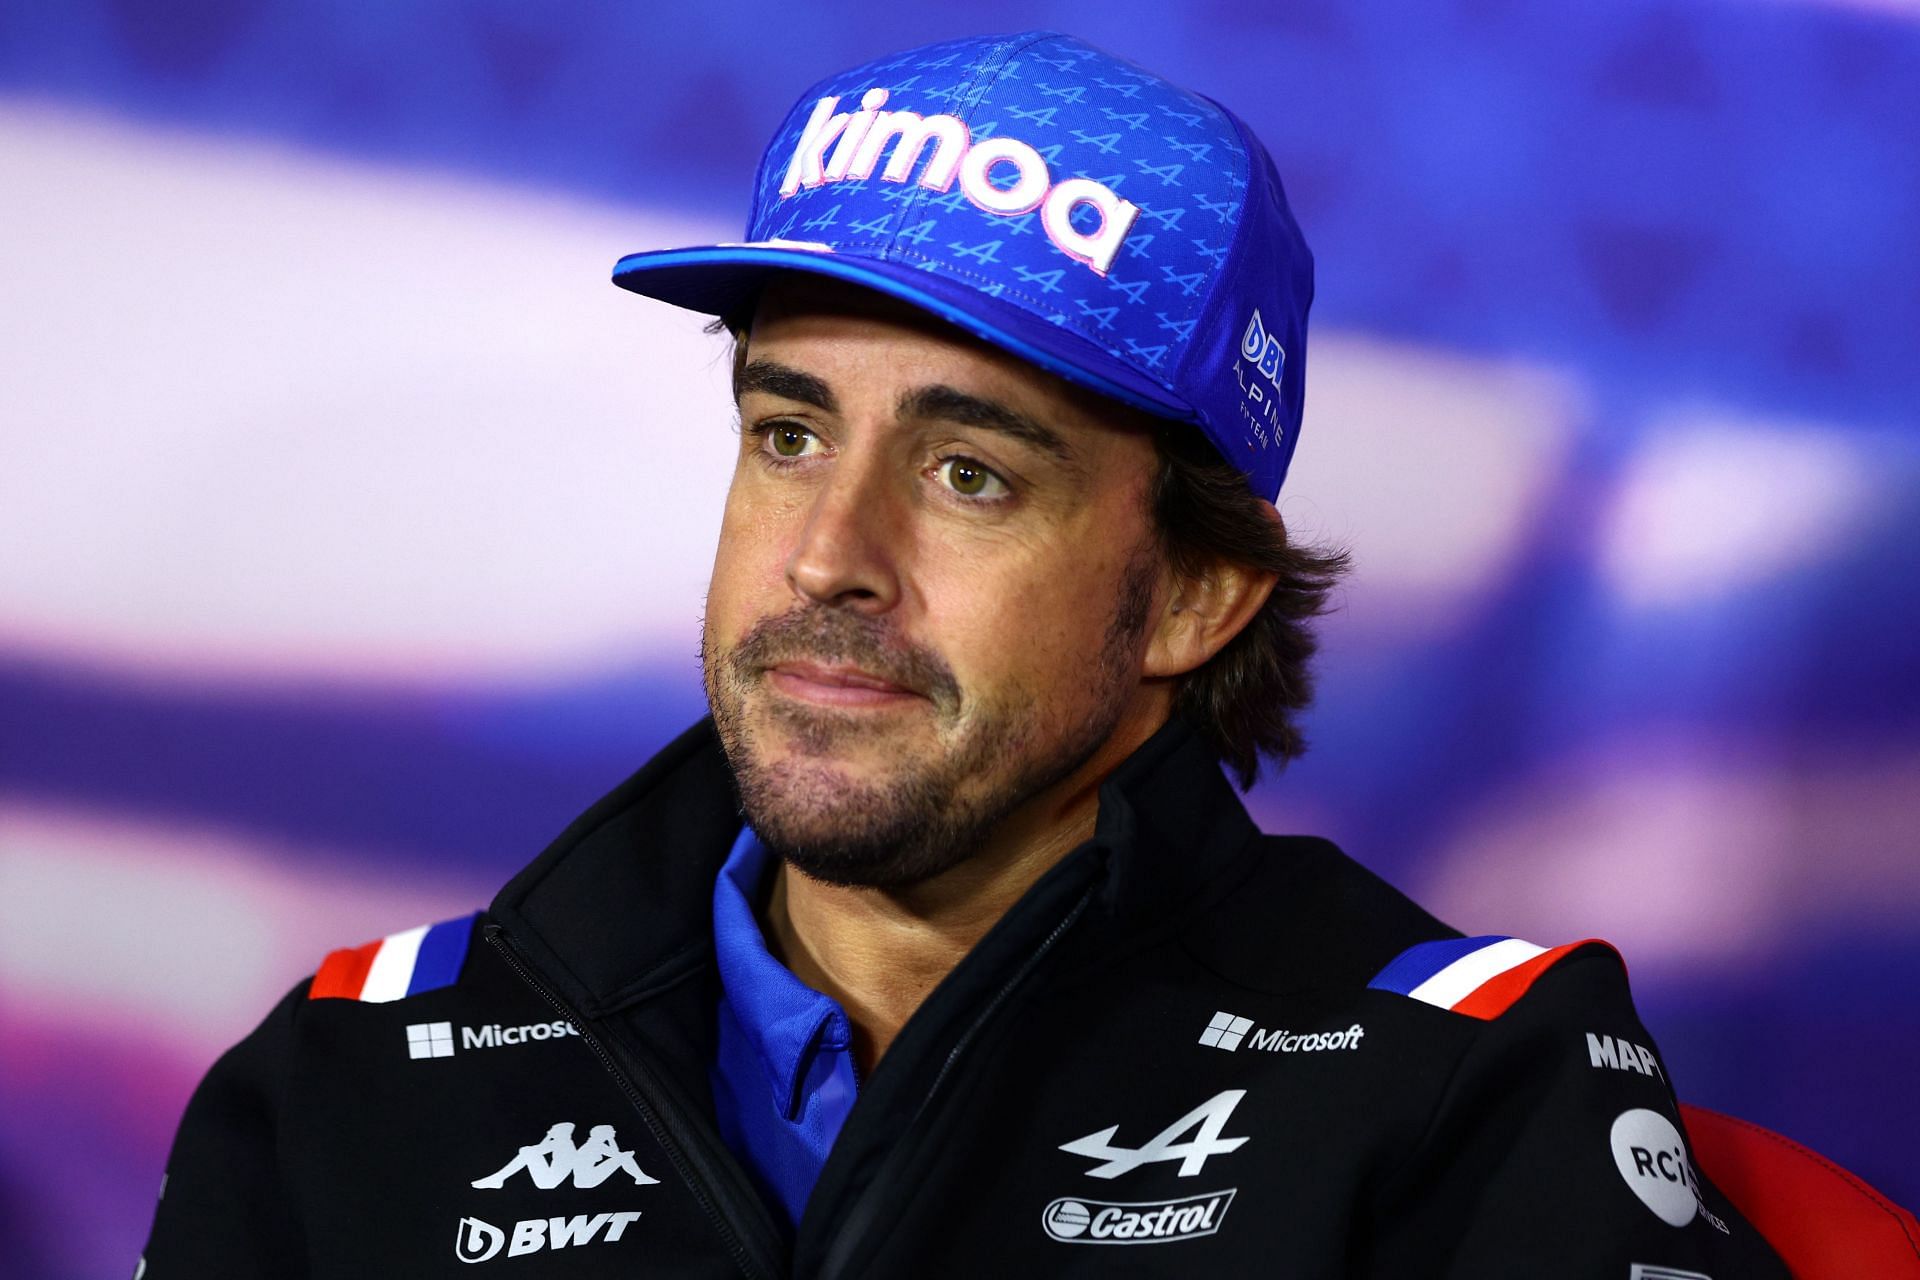 Alpine F1 driver Fernando Alonso speaks to the media ahead of the 2022 F1 British GP. (Photo by Clive Rose/Getty Images)